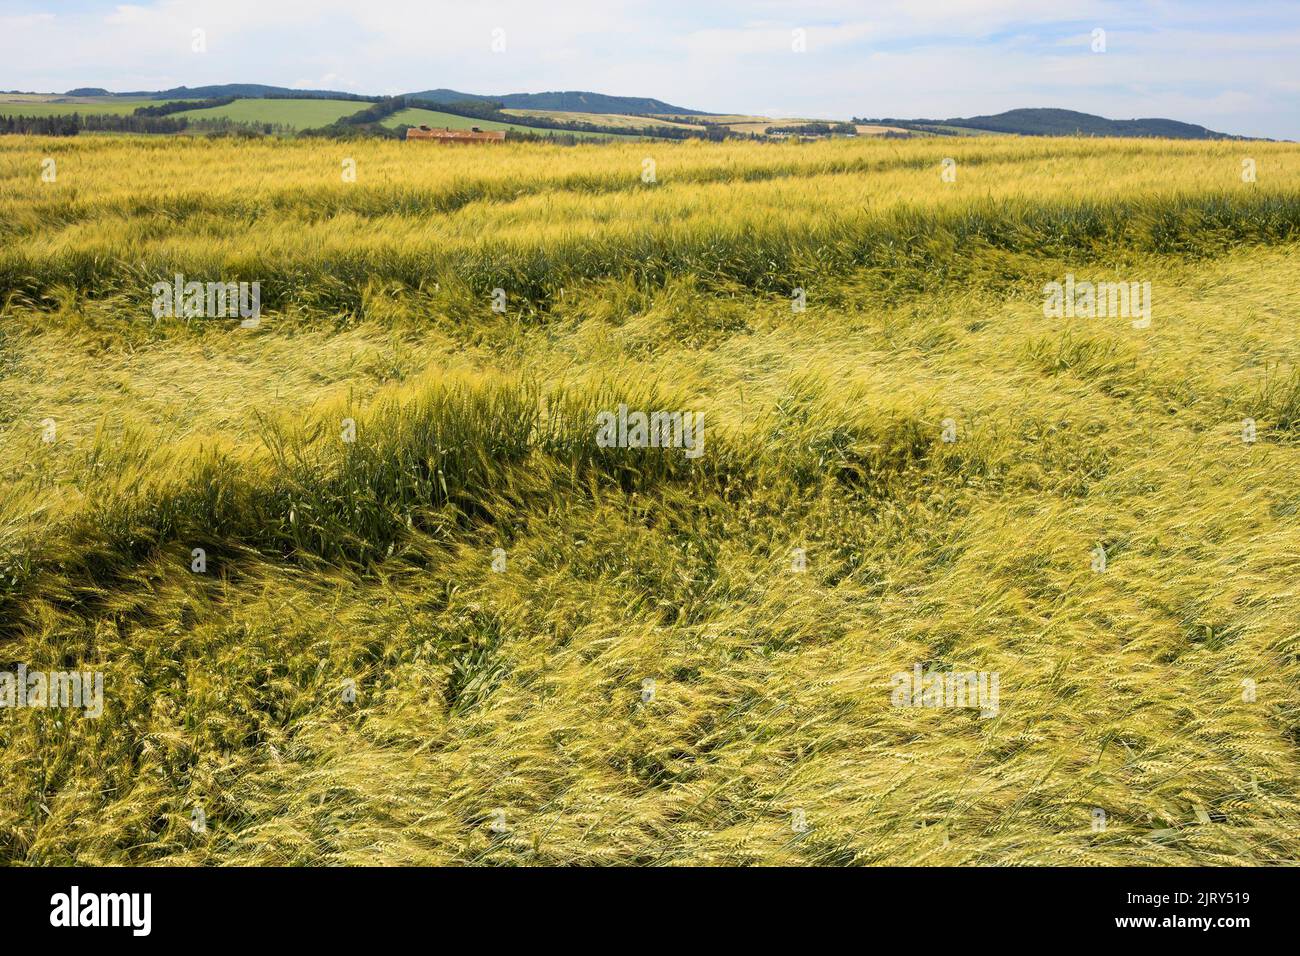 A wheat crop flattened by a rain storm and hail damage on a prairie farm field in summer, central Alberta, Canada. The crop is still harvestable. Stock Photo